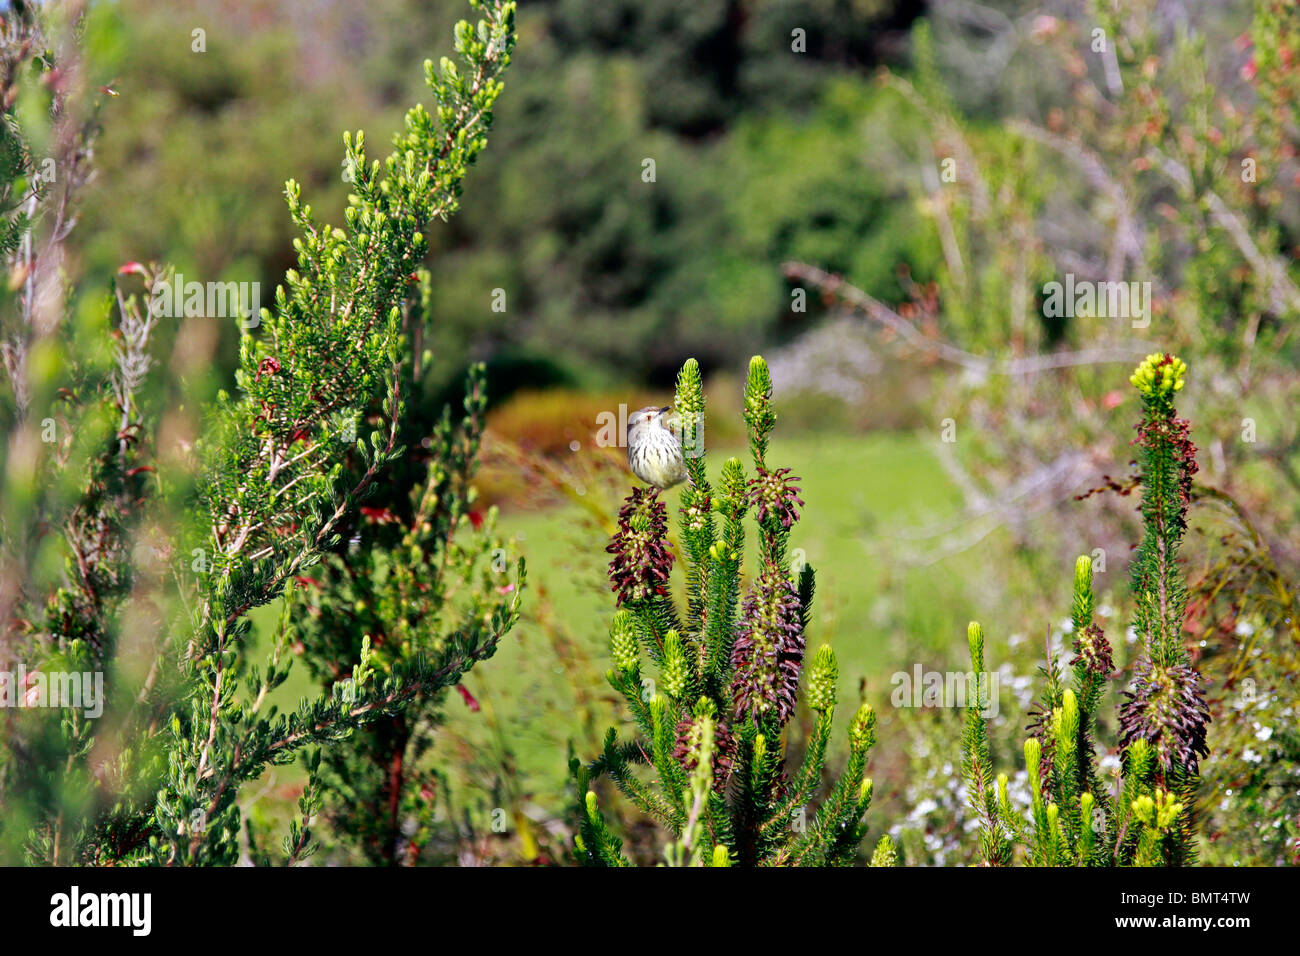 Spotted Prinia (Prinia maculosa) sitting on erica plant in Kirstenbosch National Botanical Gardens in Cape Town, South Africa. Stock Photo